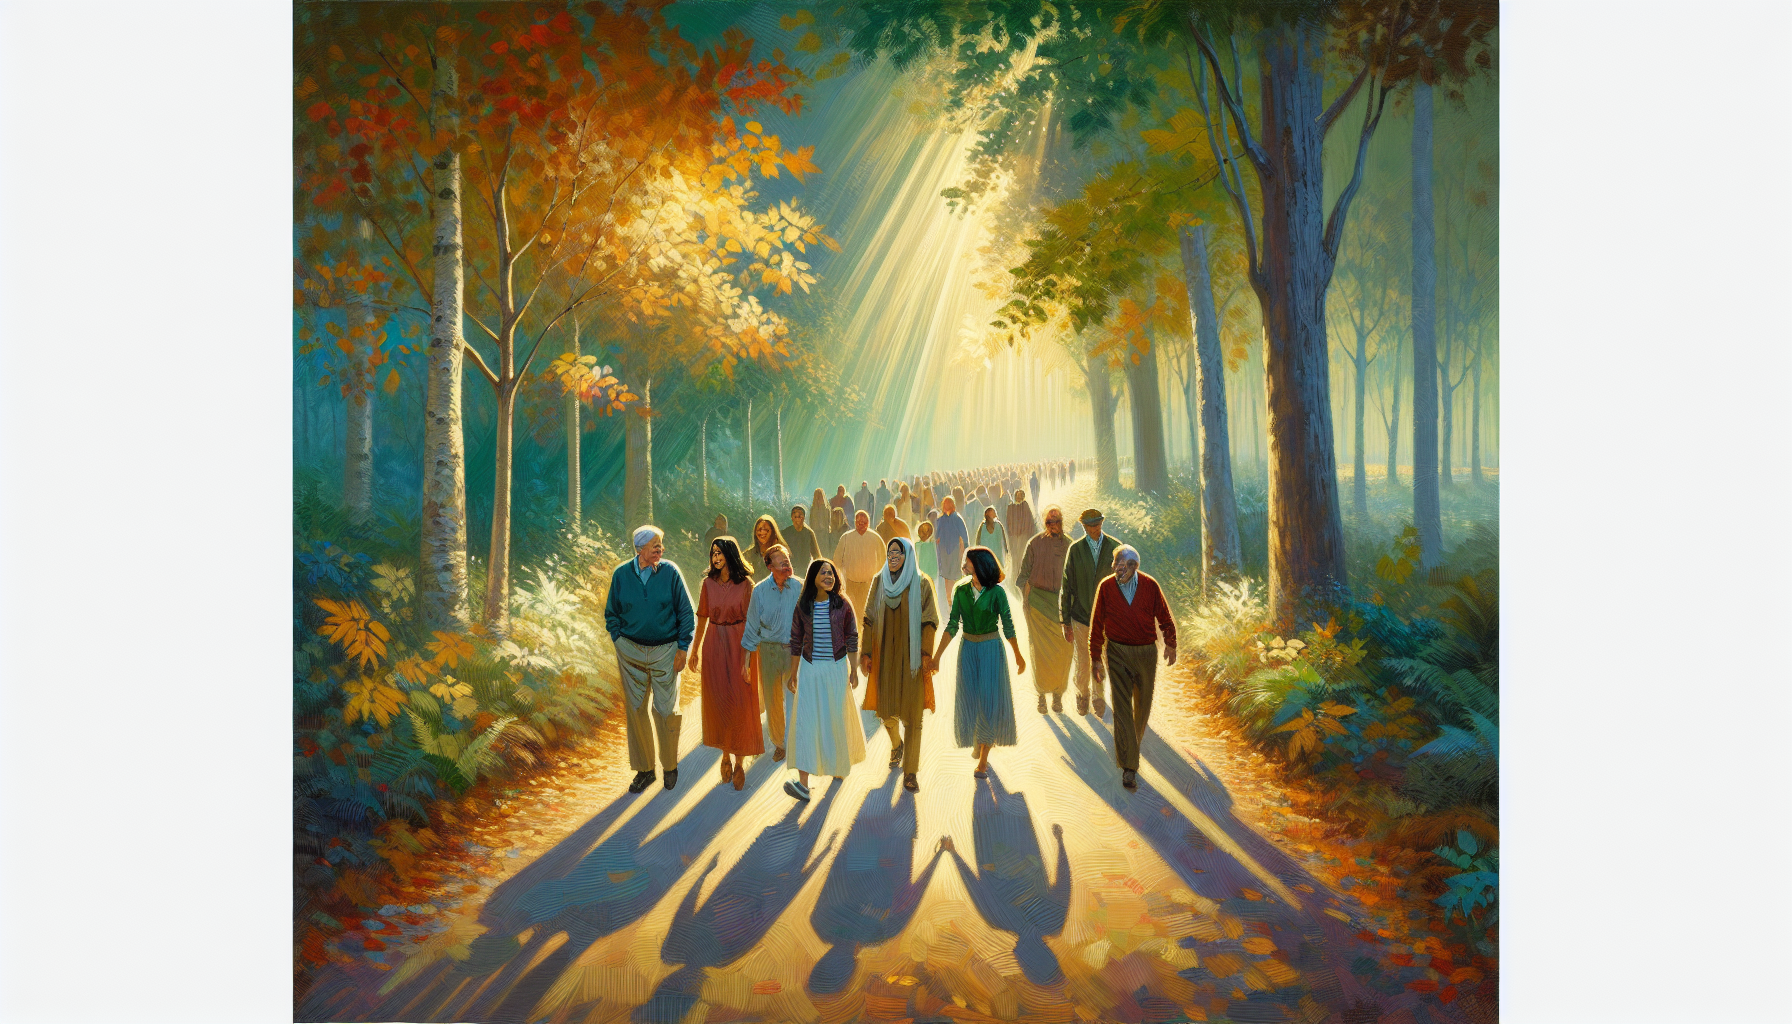 An artistic depiction of a serene, sunlit forest path, with translucent words from Romans 8:1-2 gracefully floating among the leaves and rays of sunlight, with a diverse group of people of different a